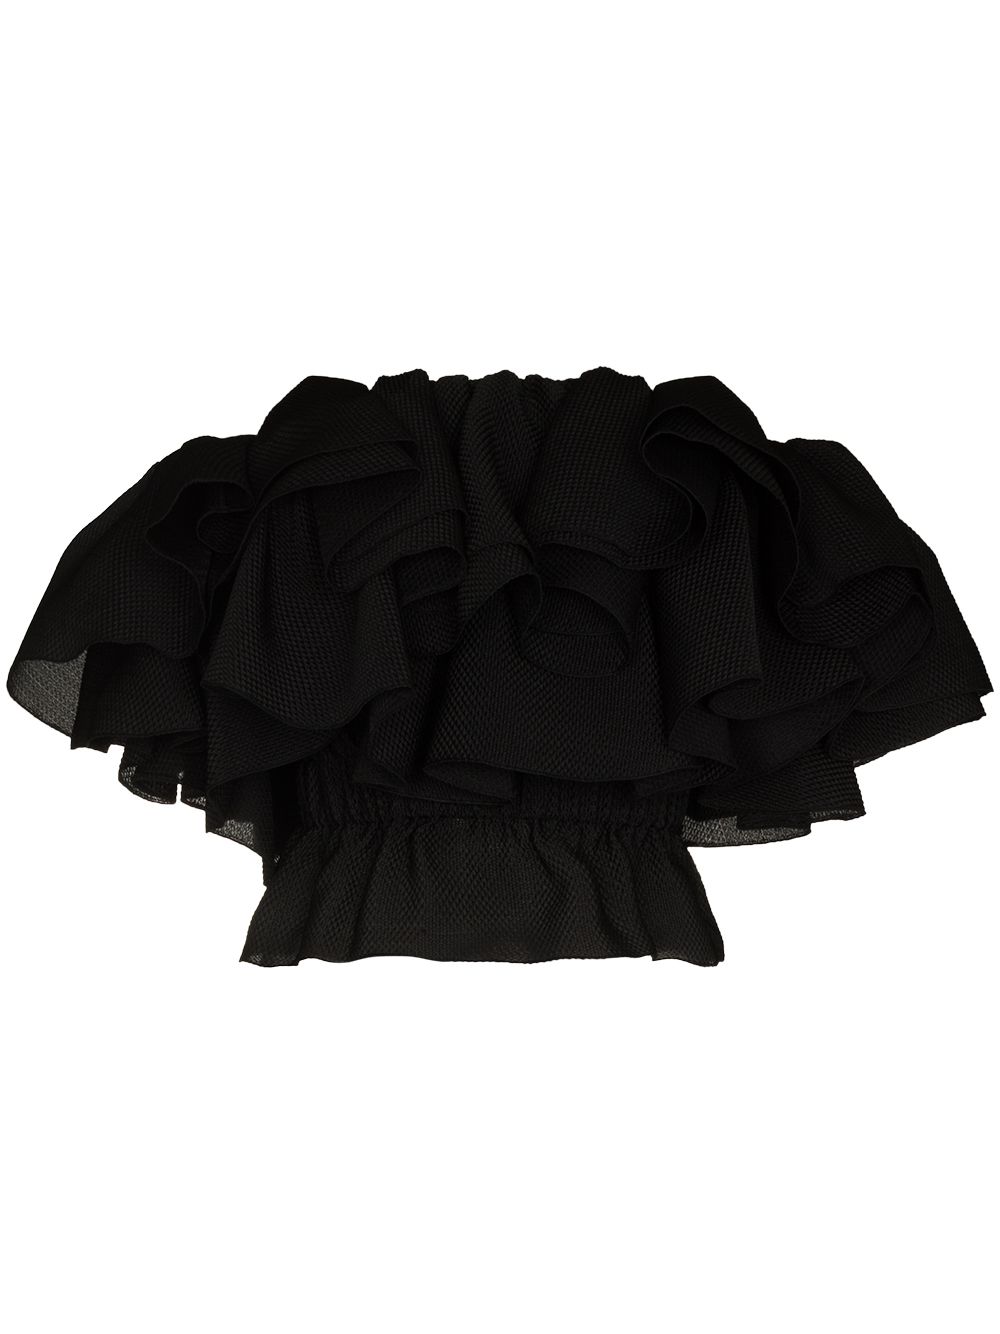 ALEXANDRE VAUTHIER OFF-THE-SHOULDER RUFFLED TOP